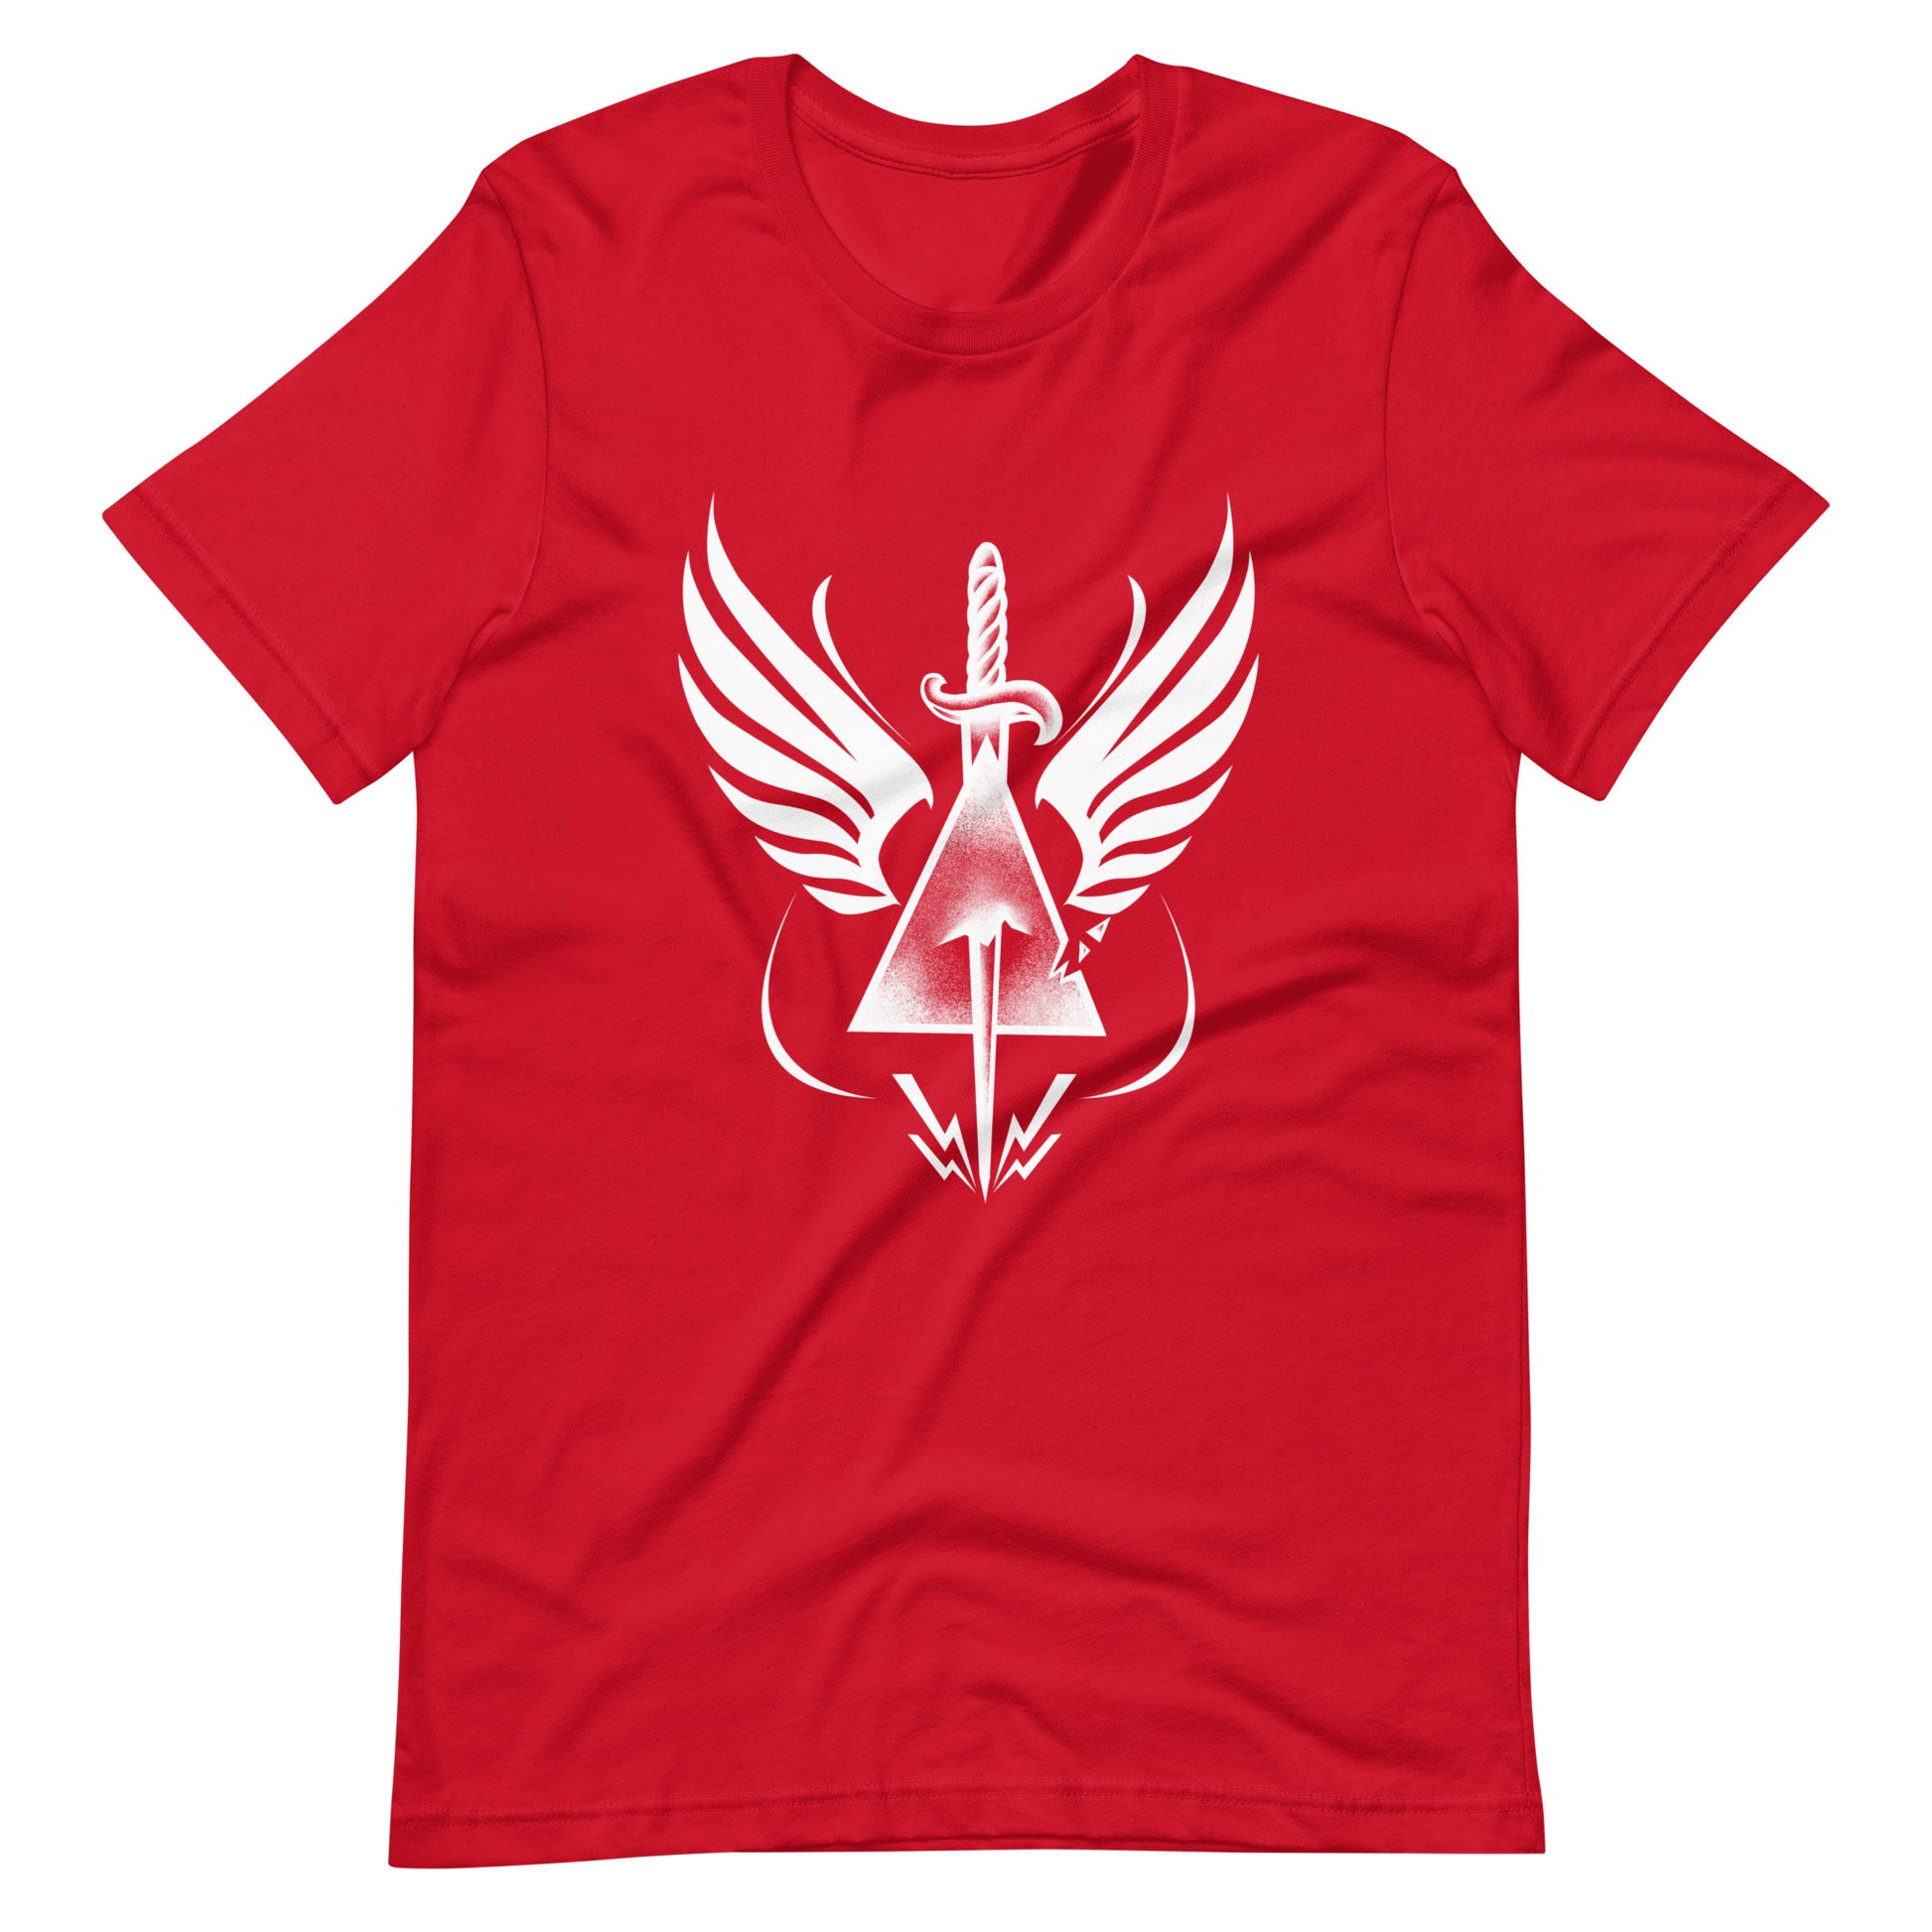 Dead Triangle - Men's t-shirt - Red Front